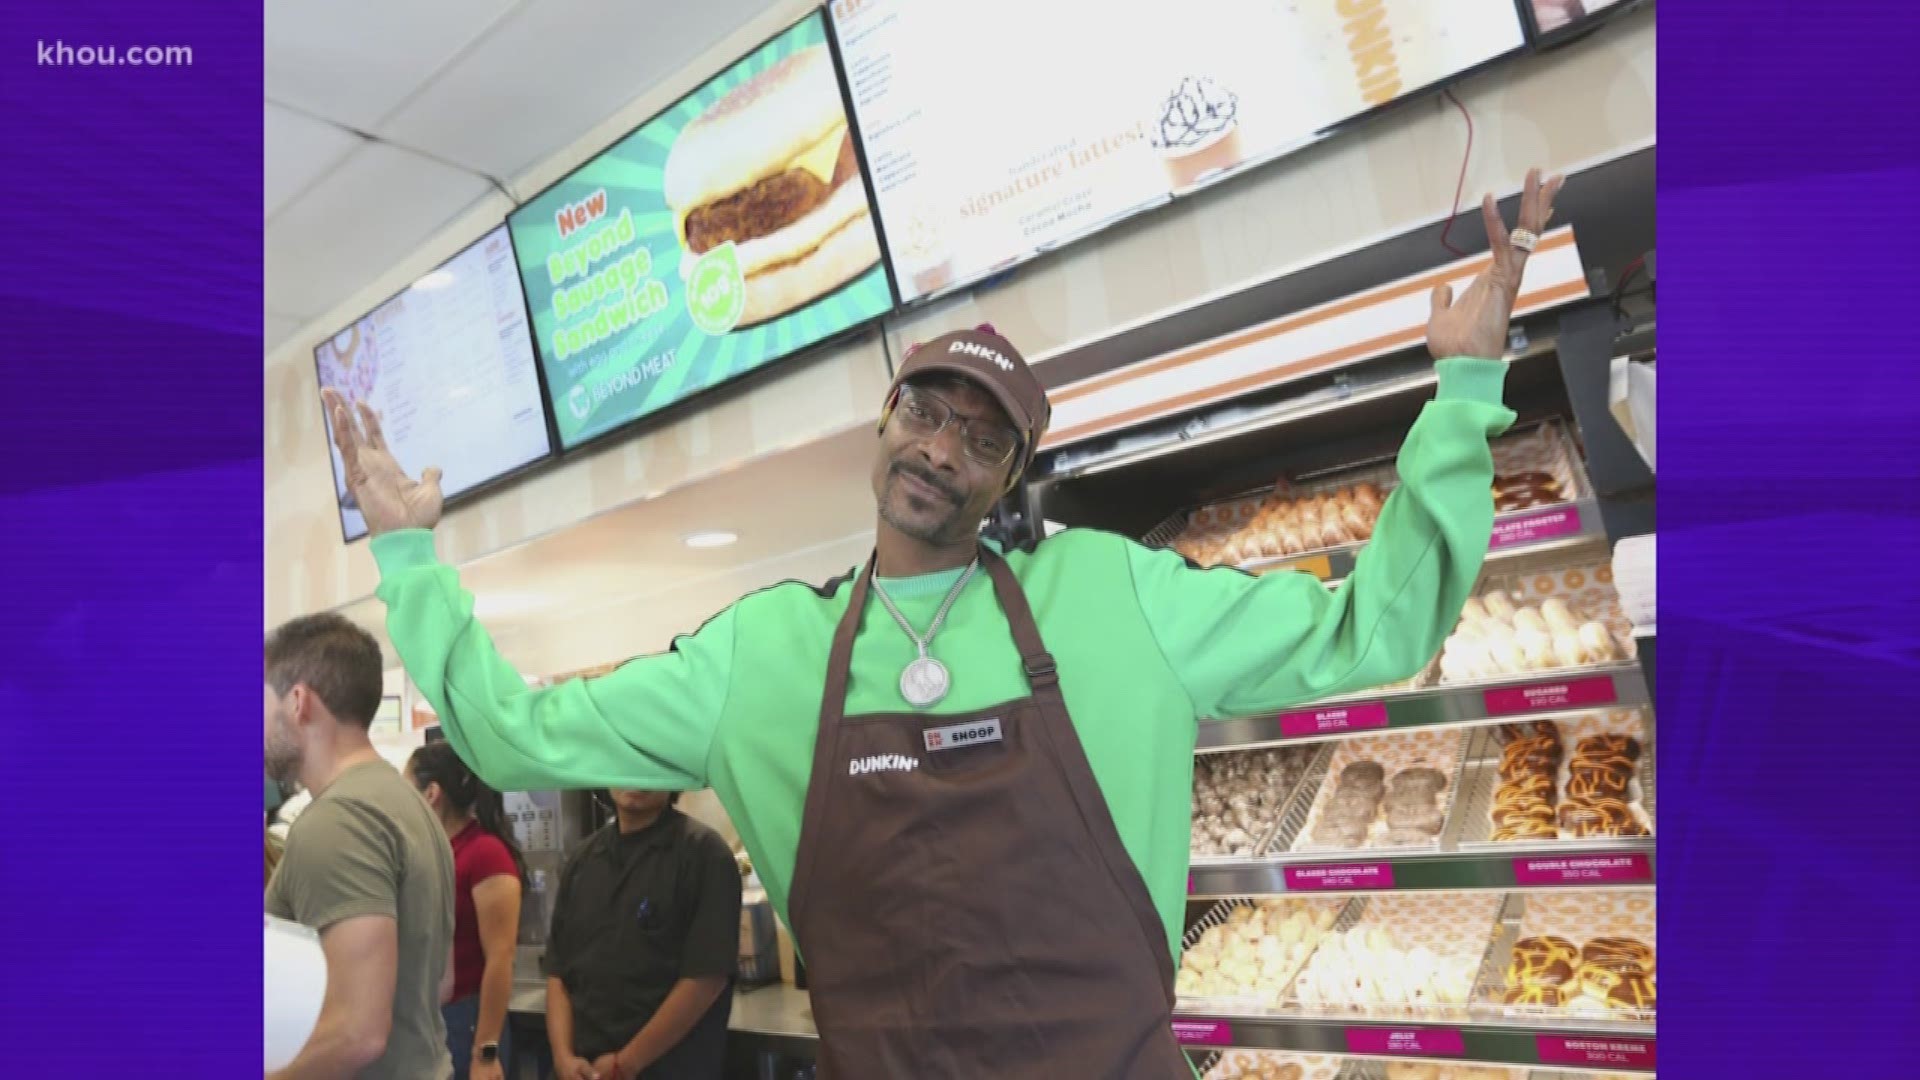 Dunkin' is joining the beyond meat craze with the "Beyond D-O-Double G Sandwich" inspired by Snoop Dogg's passion for plant-based protein and glazed donuts.